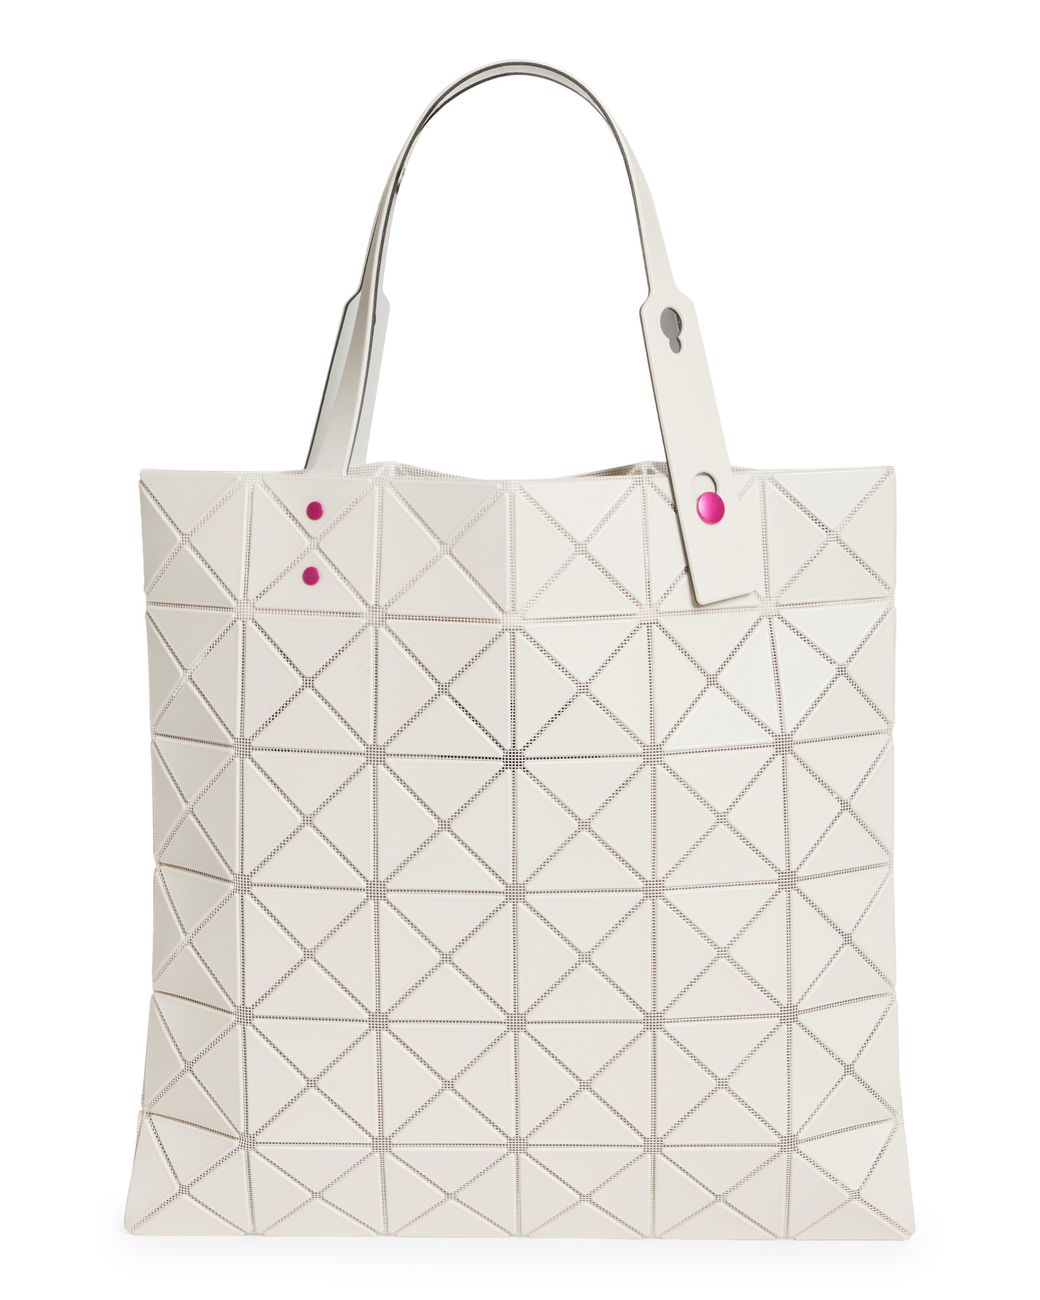 Bao Bao Issey Miyake Lucent One-tone Tote in Natural | Lyst